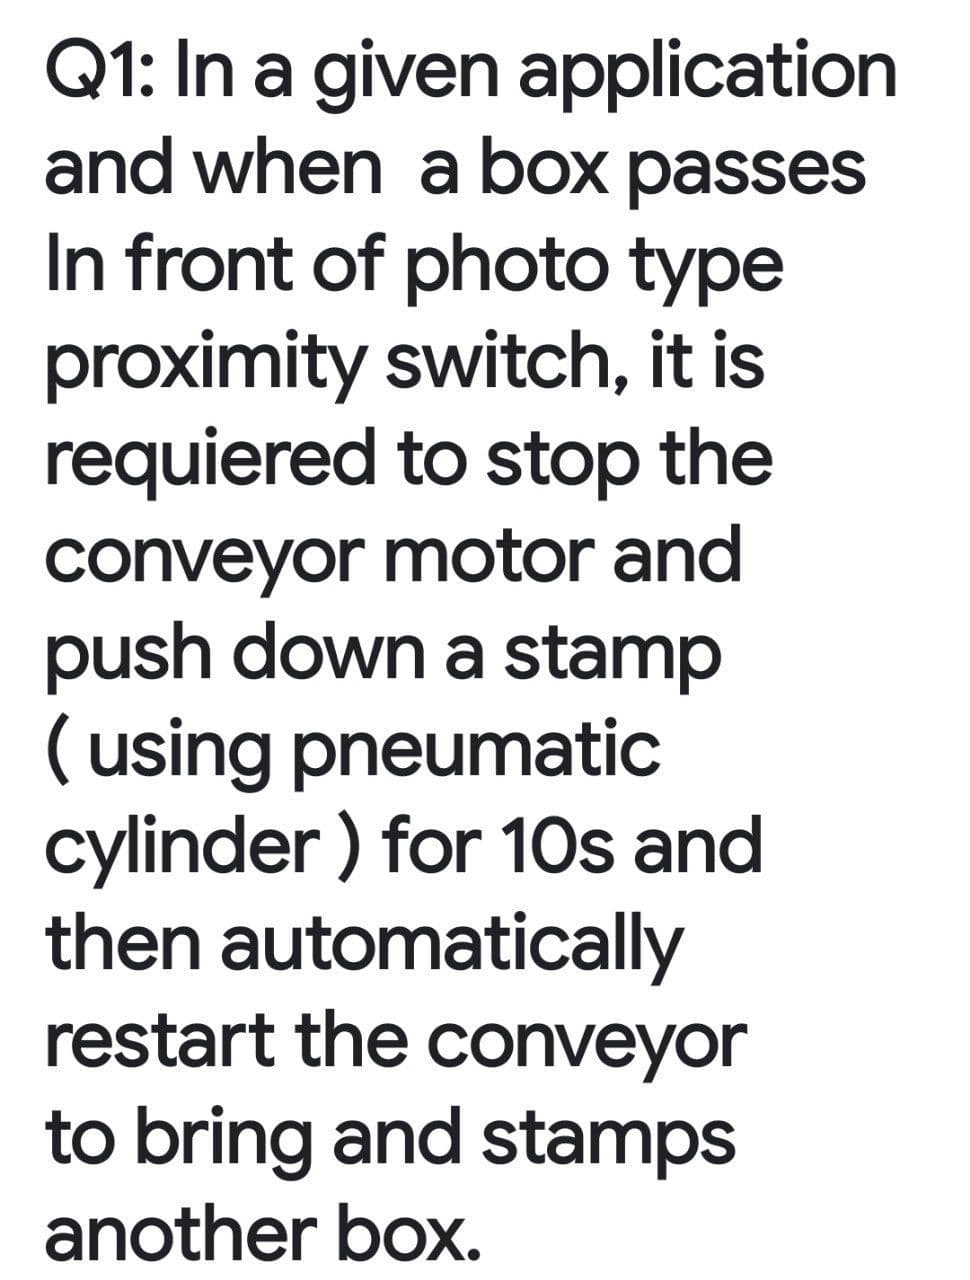 Q1: In a given application
and when a box passes
In front of photo type
proximity switch, it is
requiered to stop the
conveyor motor and
push down a stamp
( using pneumatic
cylinder ) for 1Os and
then automatically
restart the conveyor
to bring and stamps
another box.
